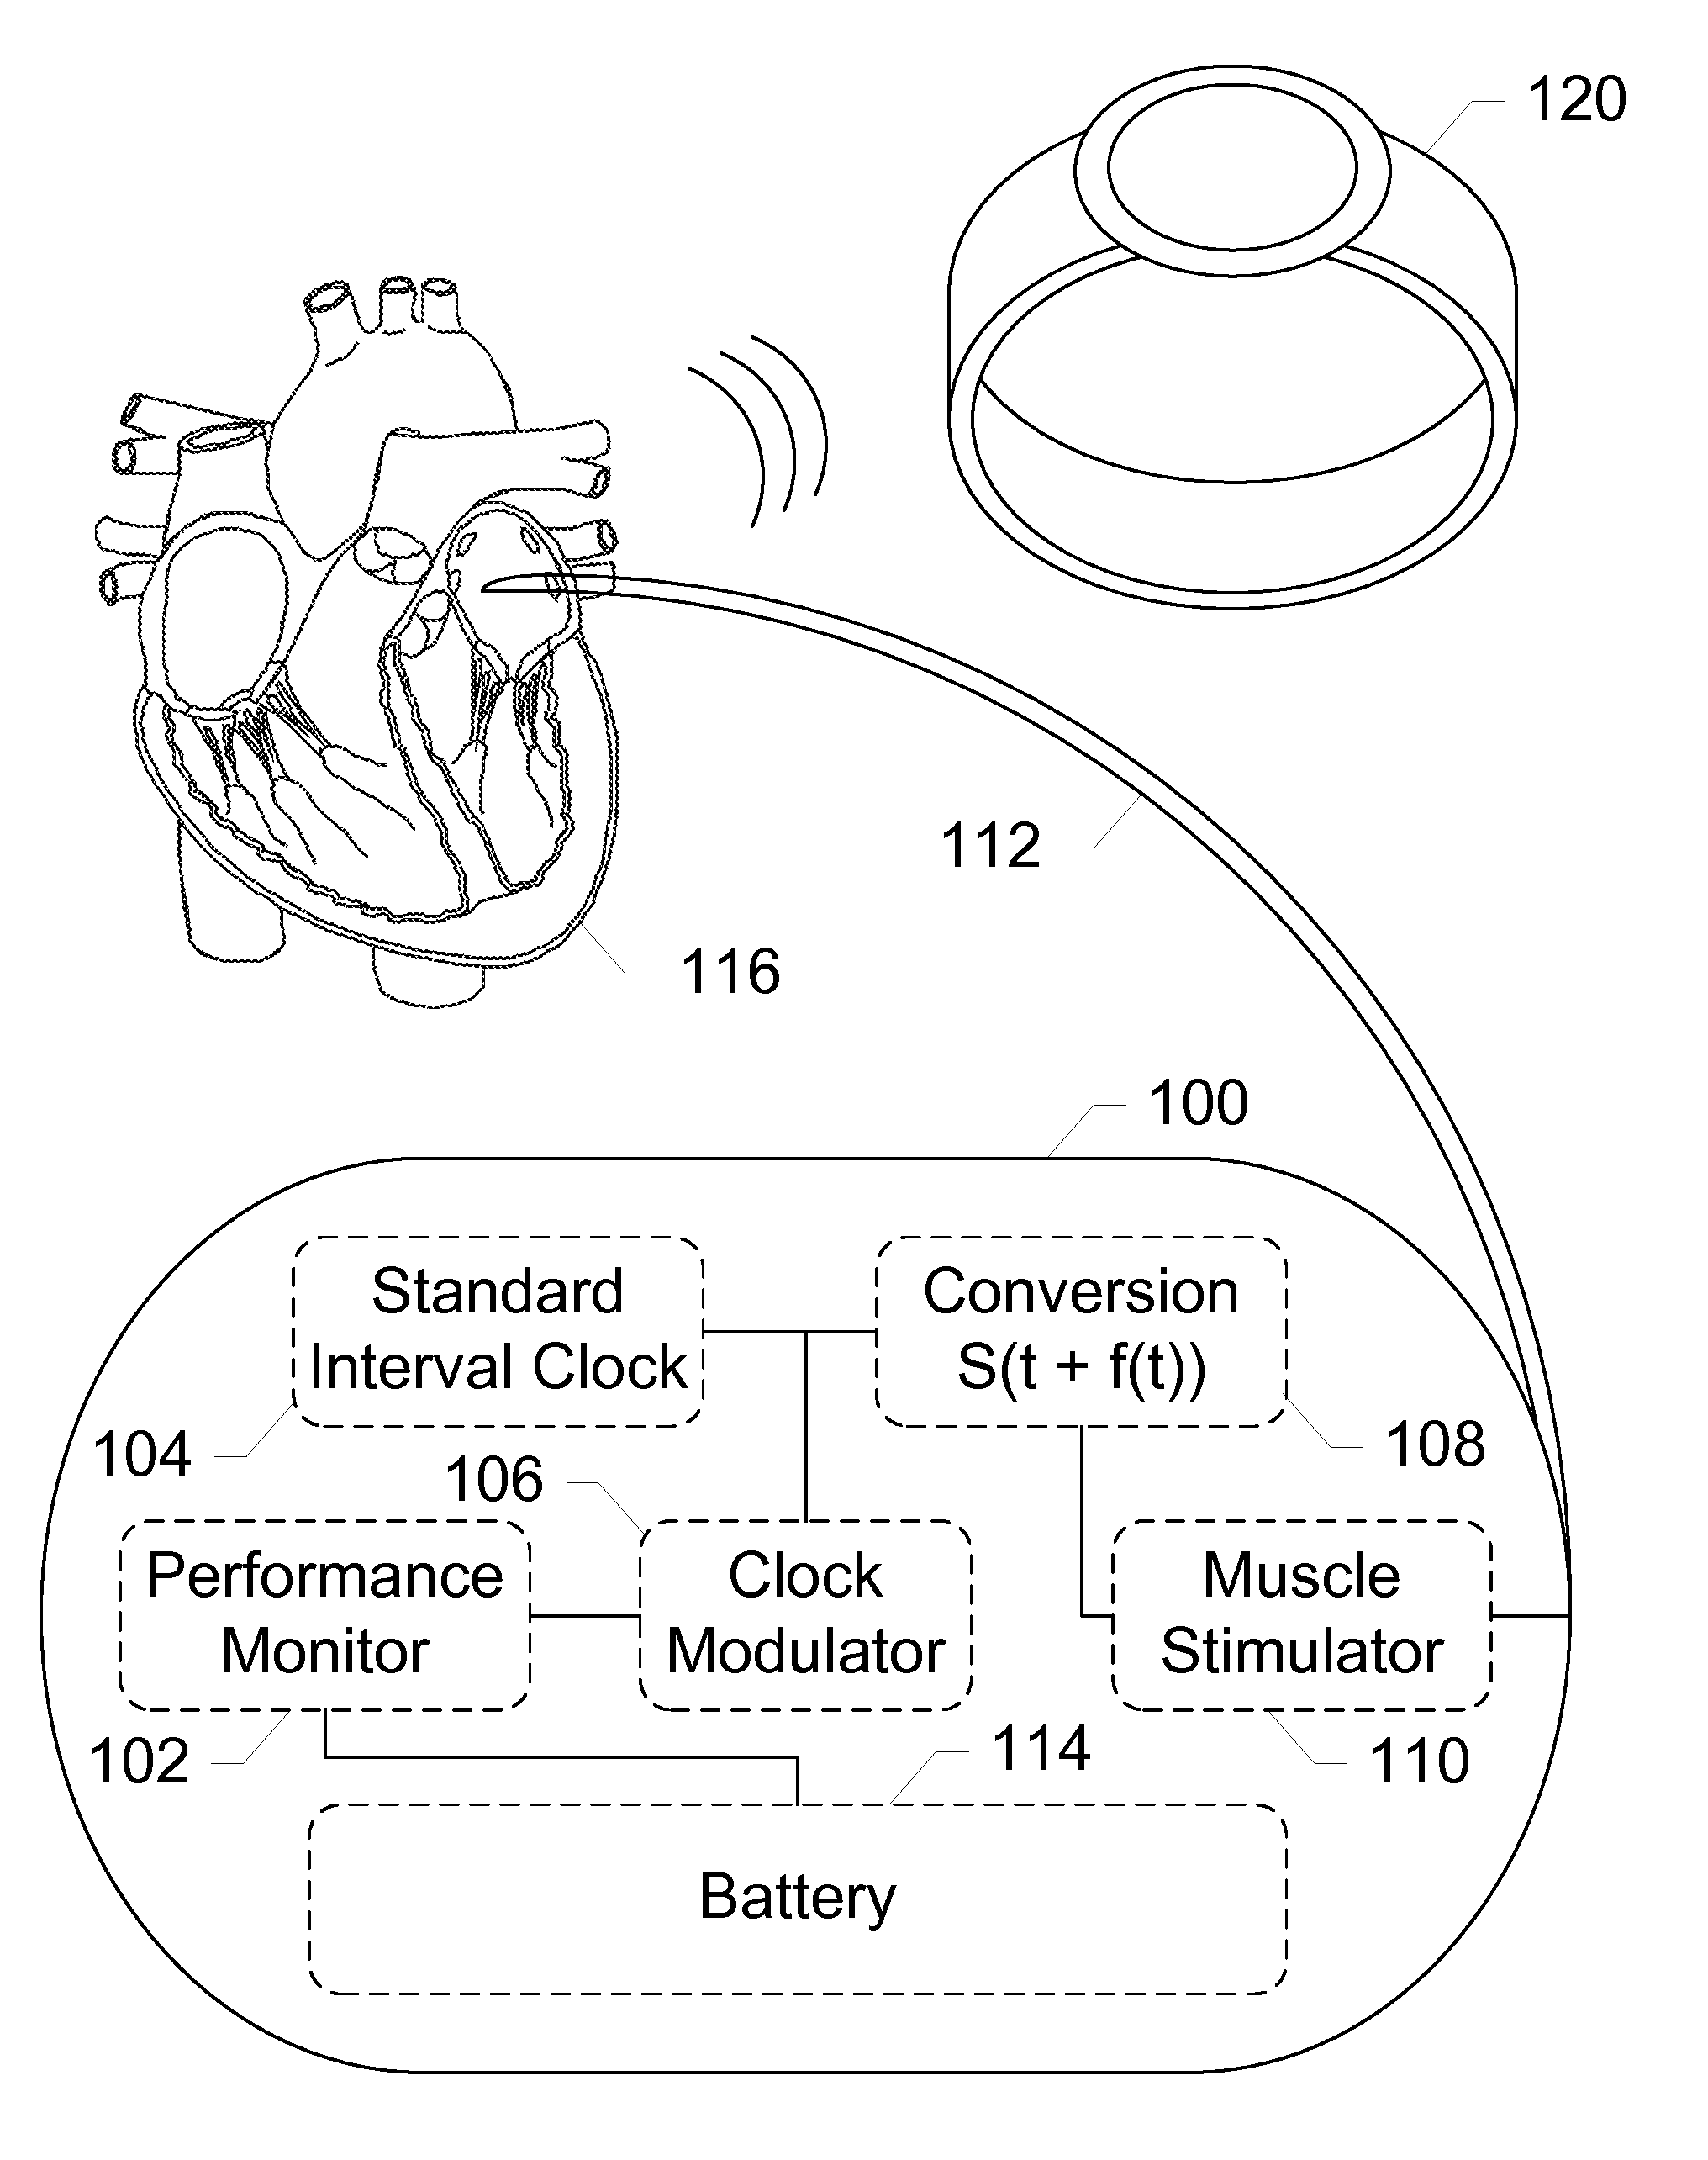 Mobile applications and methods for conveying performance information of a cardiac pacemaker